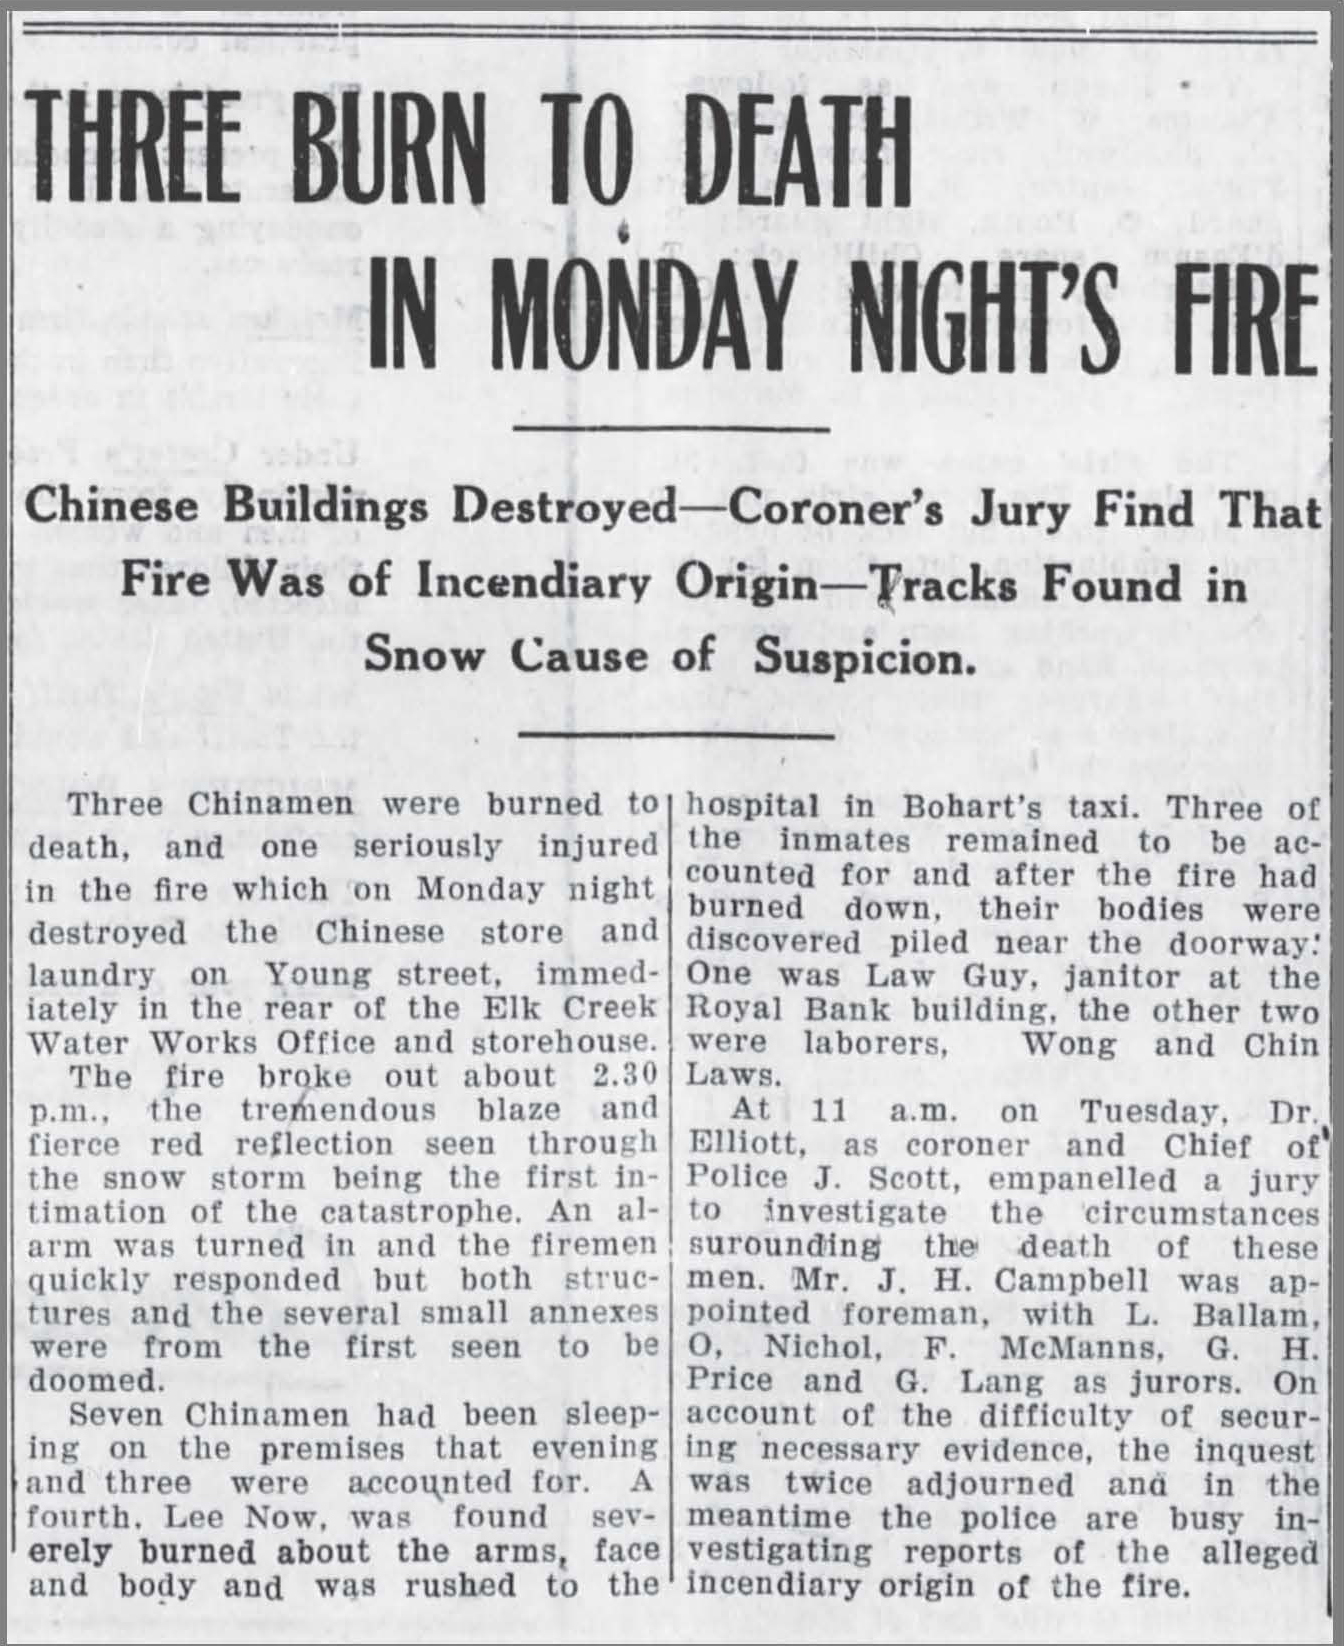 A newspaper clipping from the Chilliwack Progress discussing the 1921 Chinatown fire